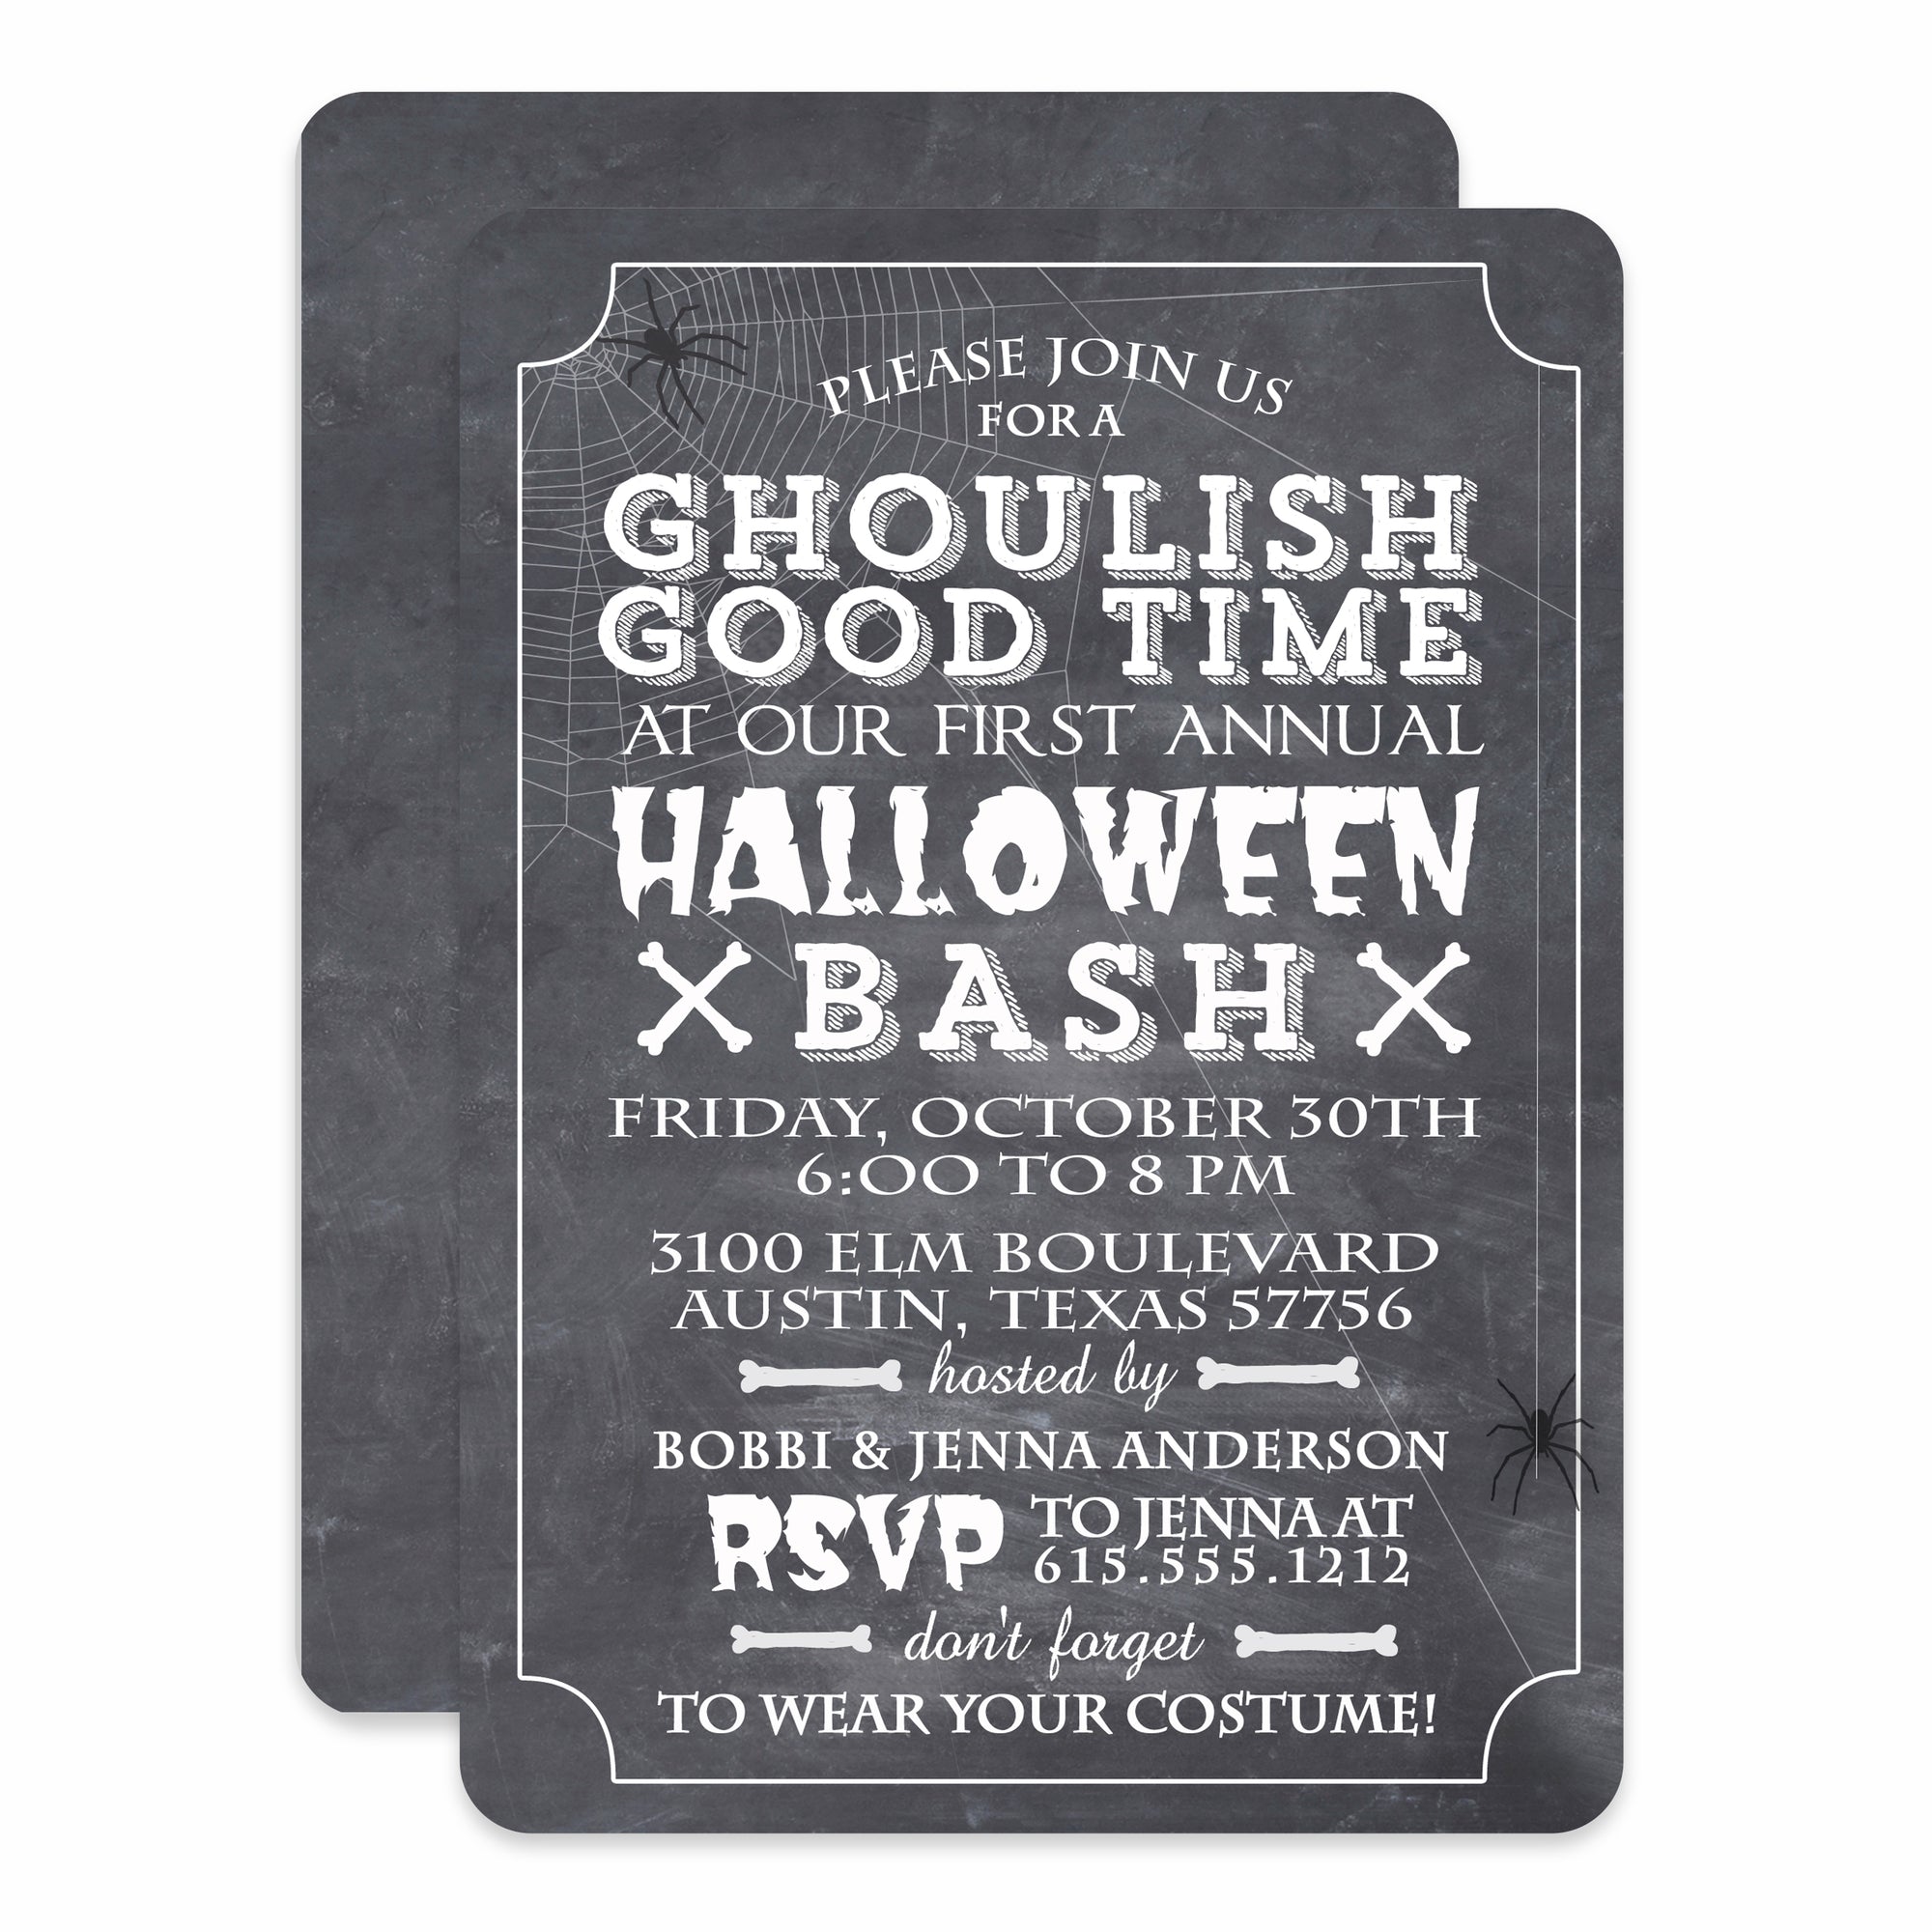 Ghoulish Good Time Halloween Invitation | Chalkboard Style Invite | Printed | PIPSY.COM